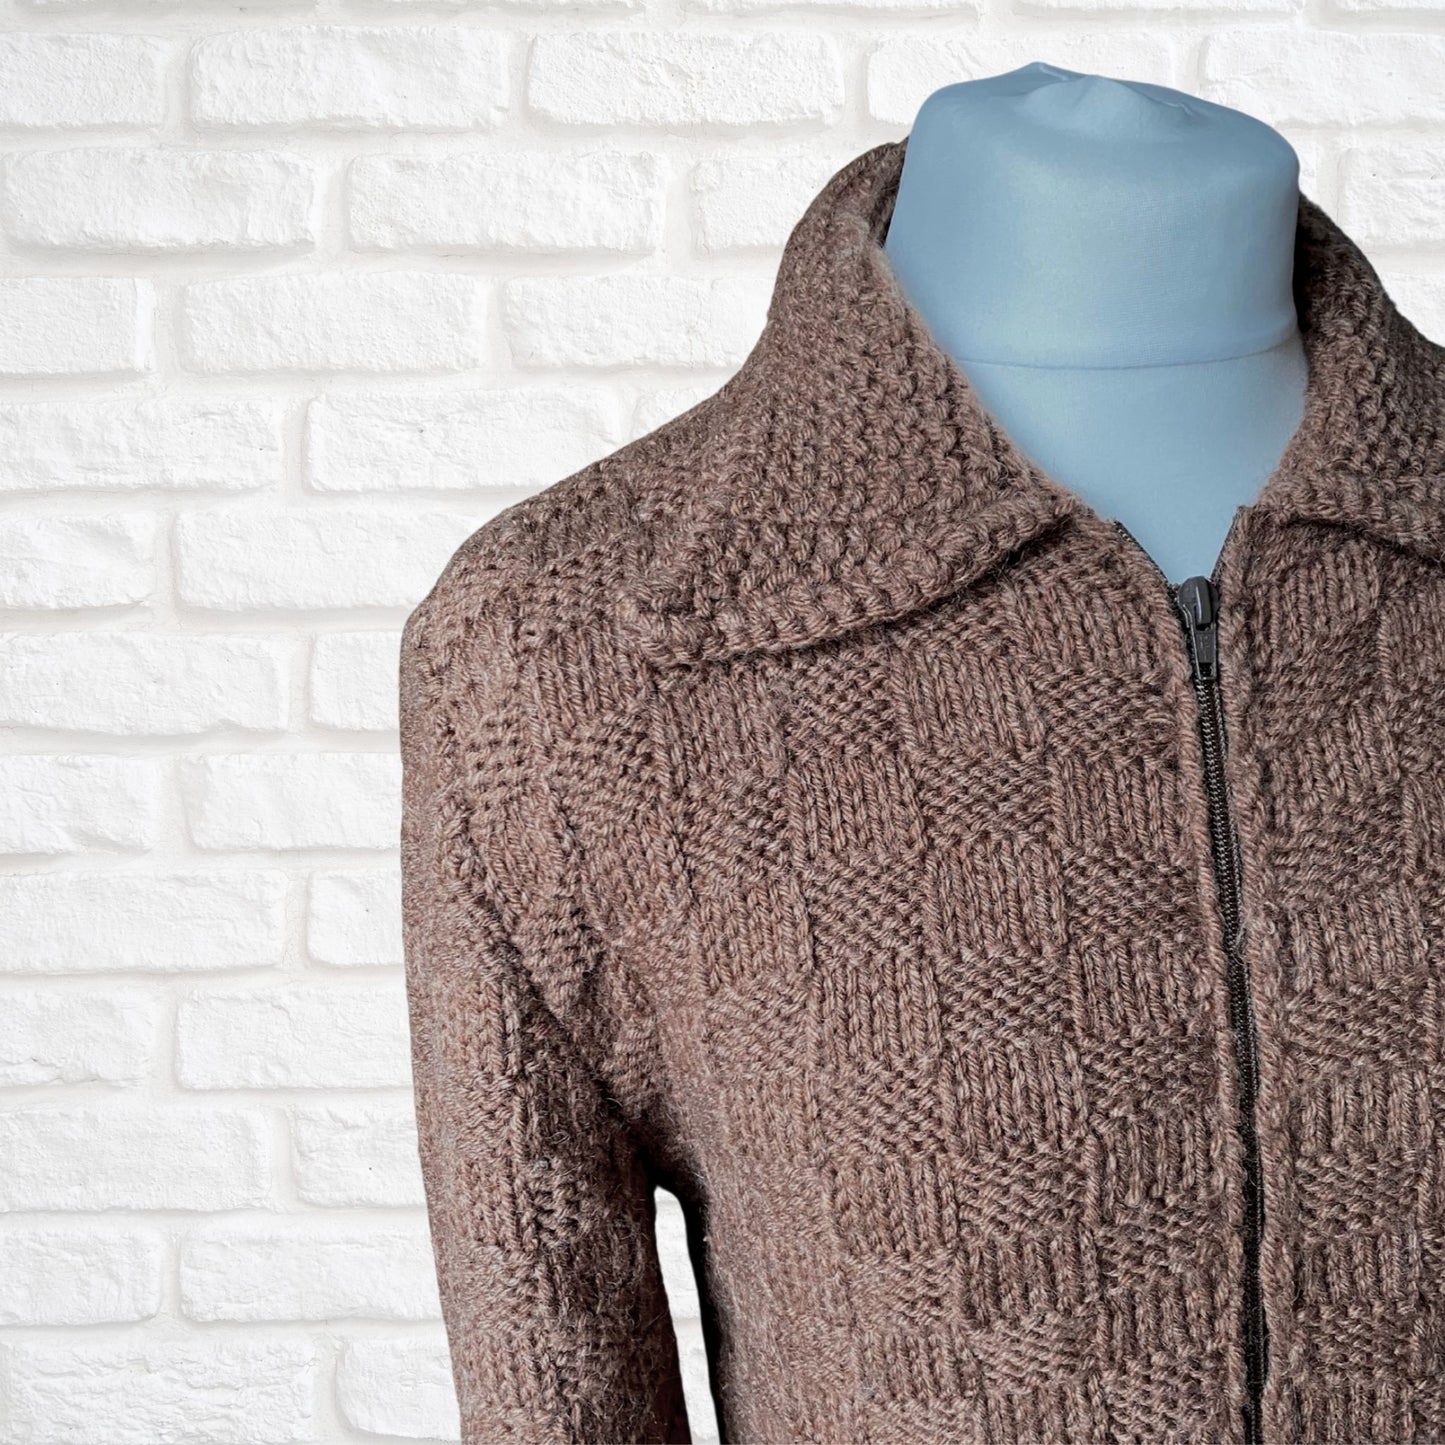 Vintage Brown Textured Knit Zip Up Cardigan: Cozy and Stylish  Sweater. UK size 10-16 (women) / Small to Medium  (men)